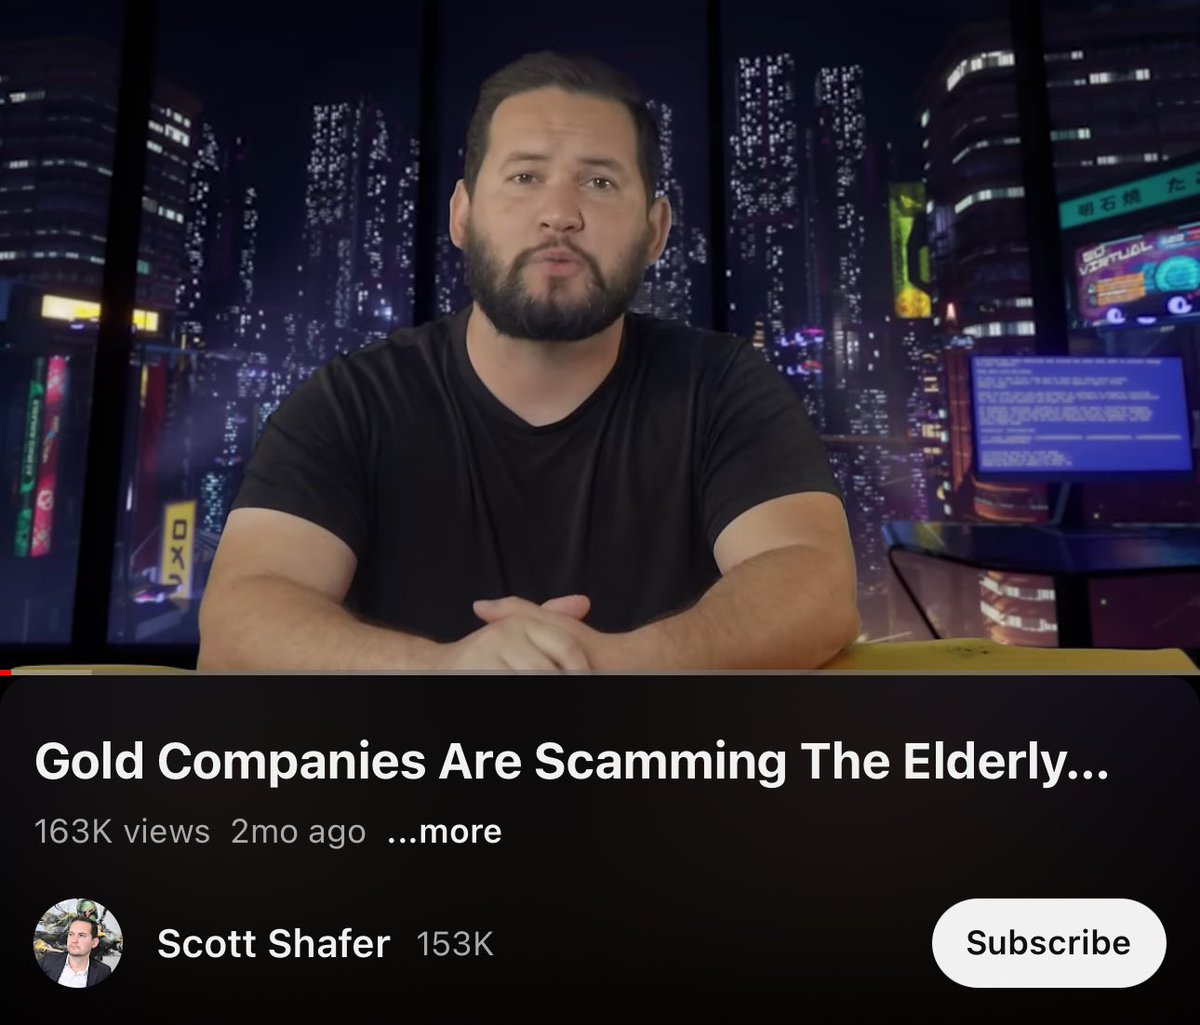 GOLD COMPANIES ARE SCAMMING THE ELDERLY: from Scott Shafer
153k subscribers on YouTube 

If you’ve put money into GoldCo or are thinking about it - protect yourself now.

Don’t do it. There are smarter & better ways to invest in Gold and Silver. 

Watch here:…